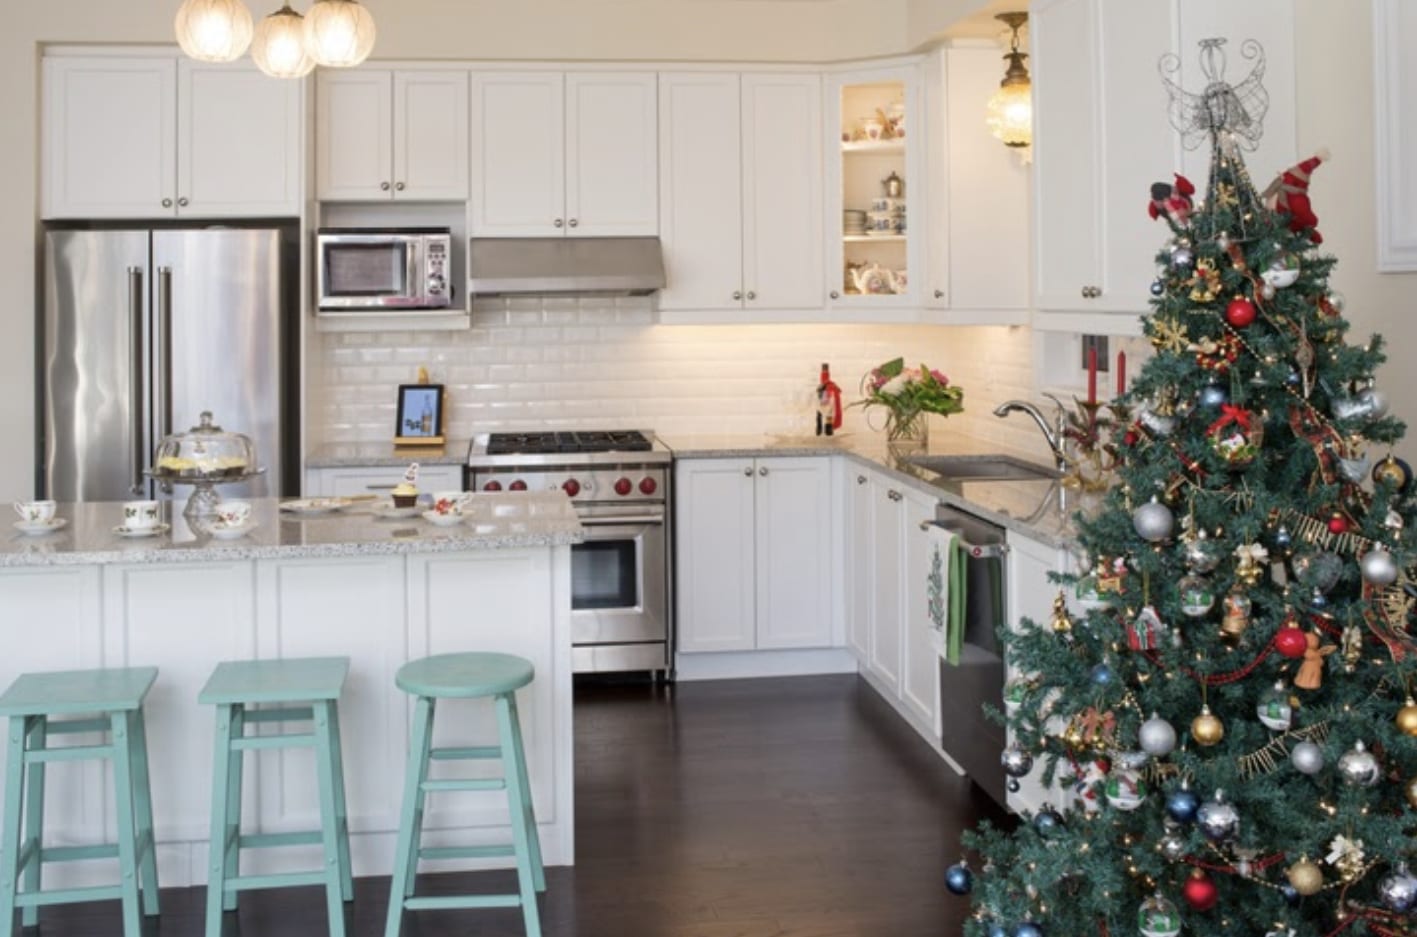 Refresh Your Home for the Holidays